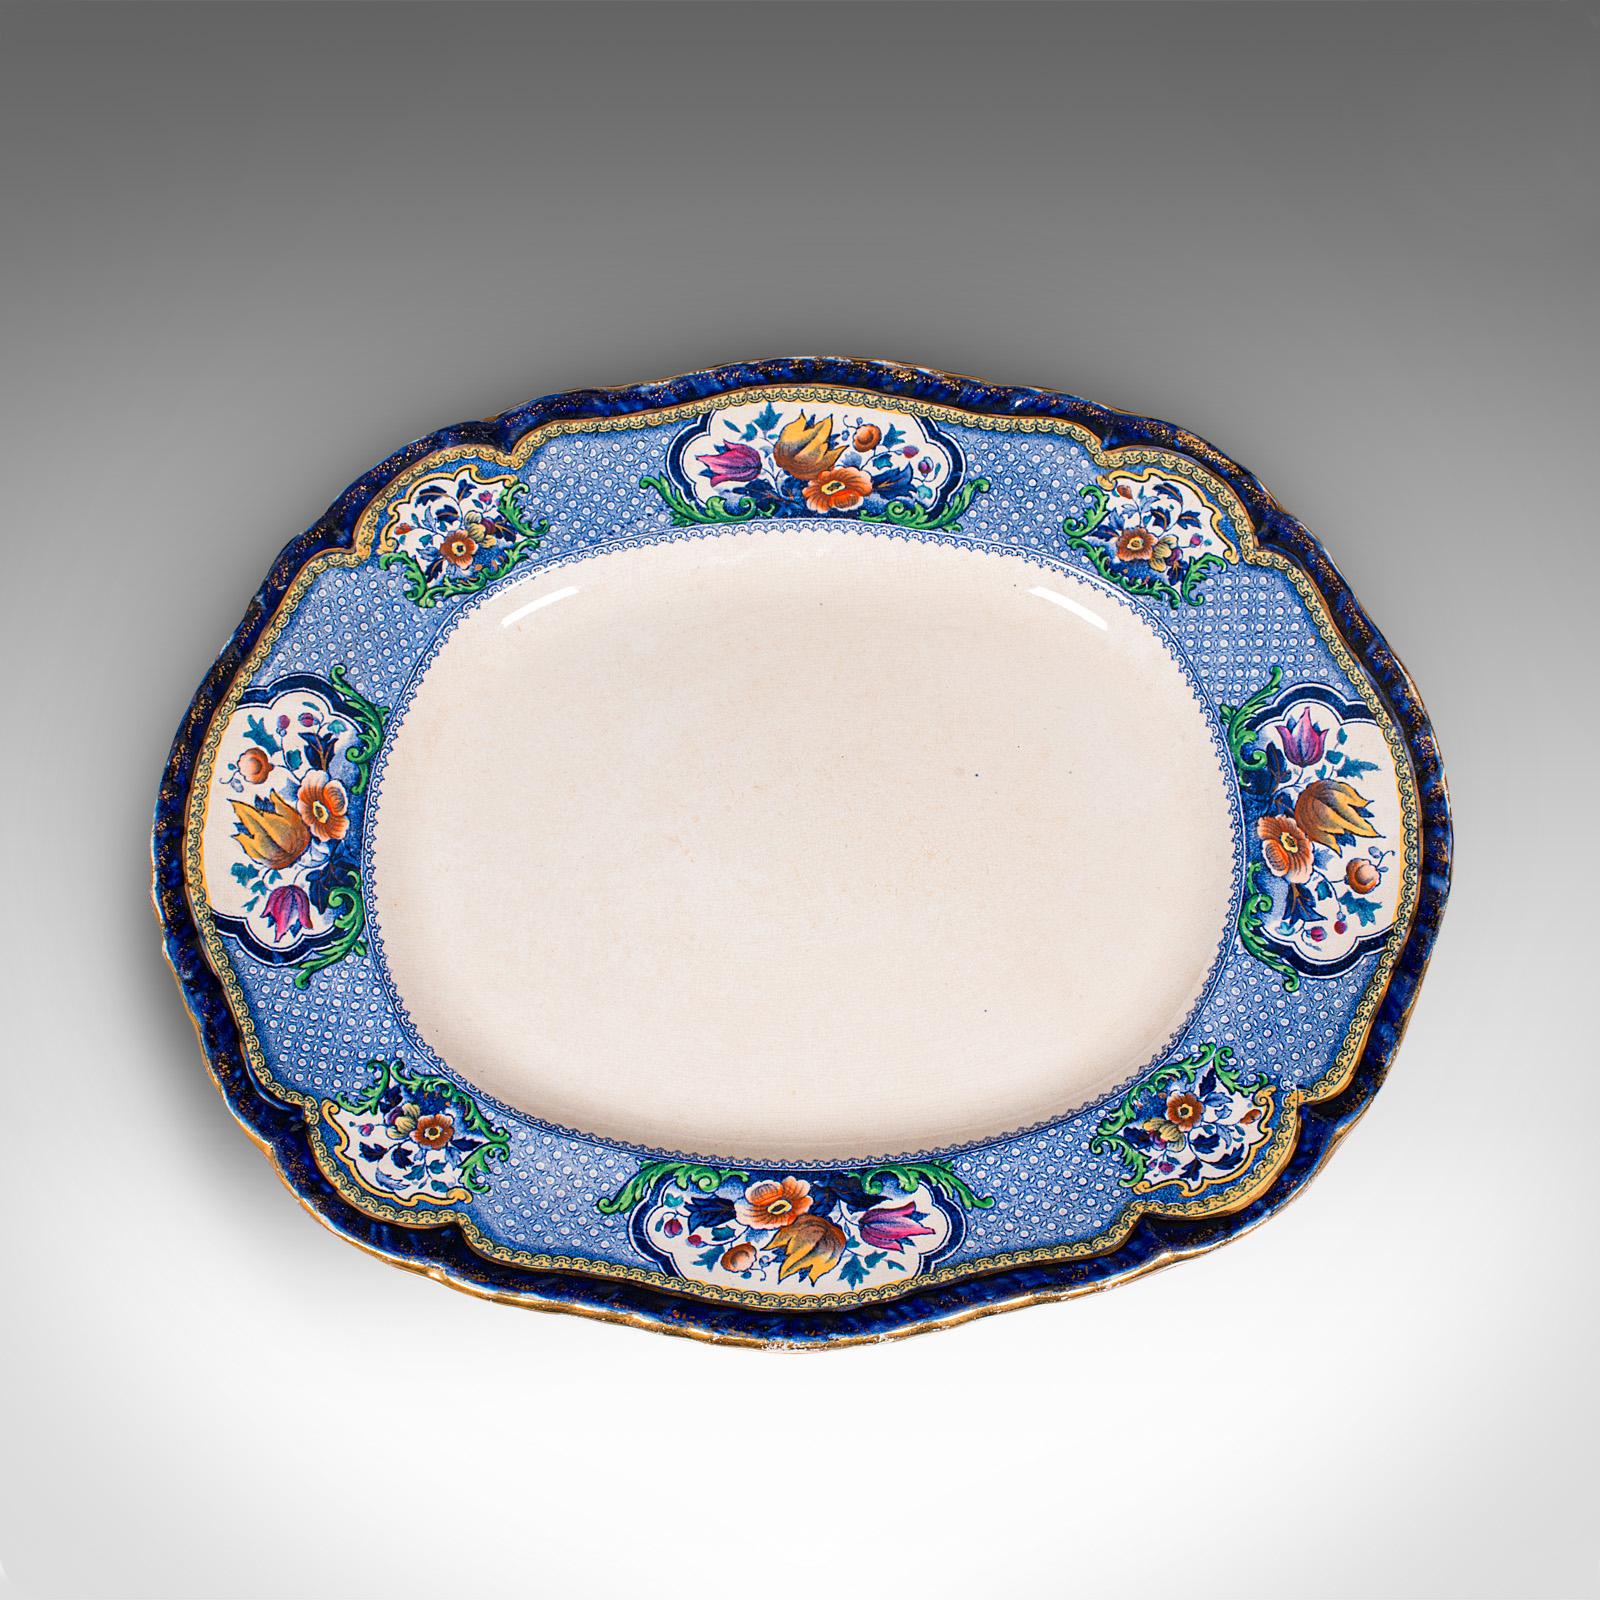 Set of 2 Large Antique Meat & Poultry Platters, English Ceramic, Victorian, 1900 For Sale 2